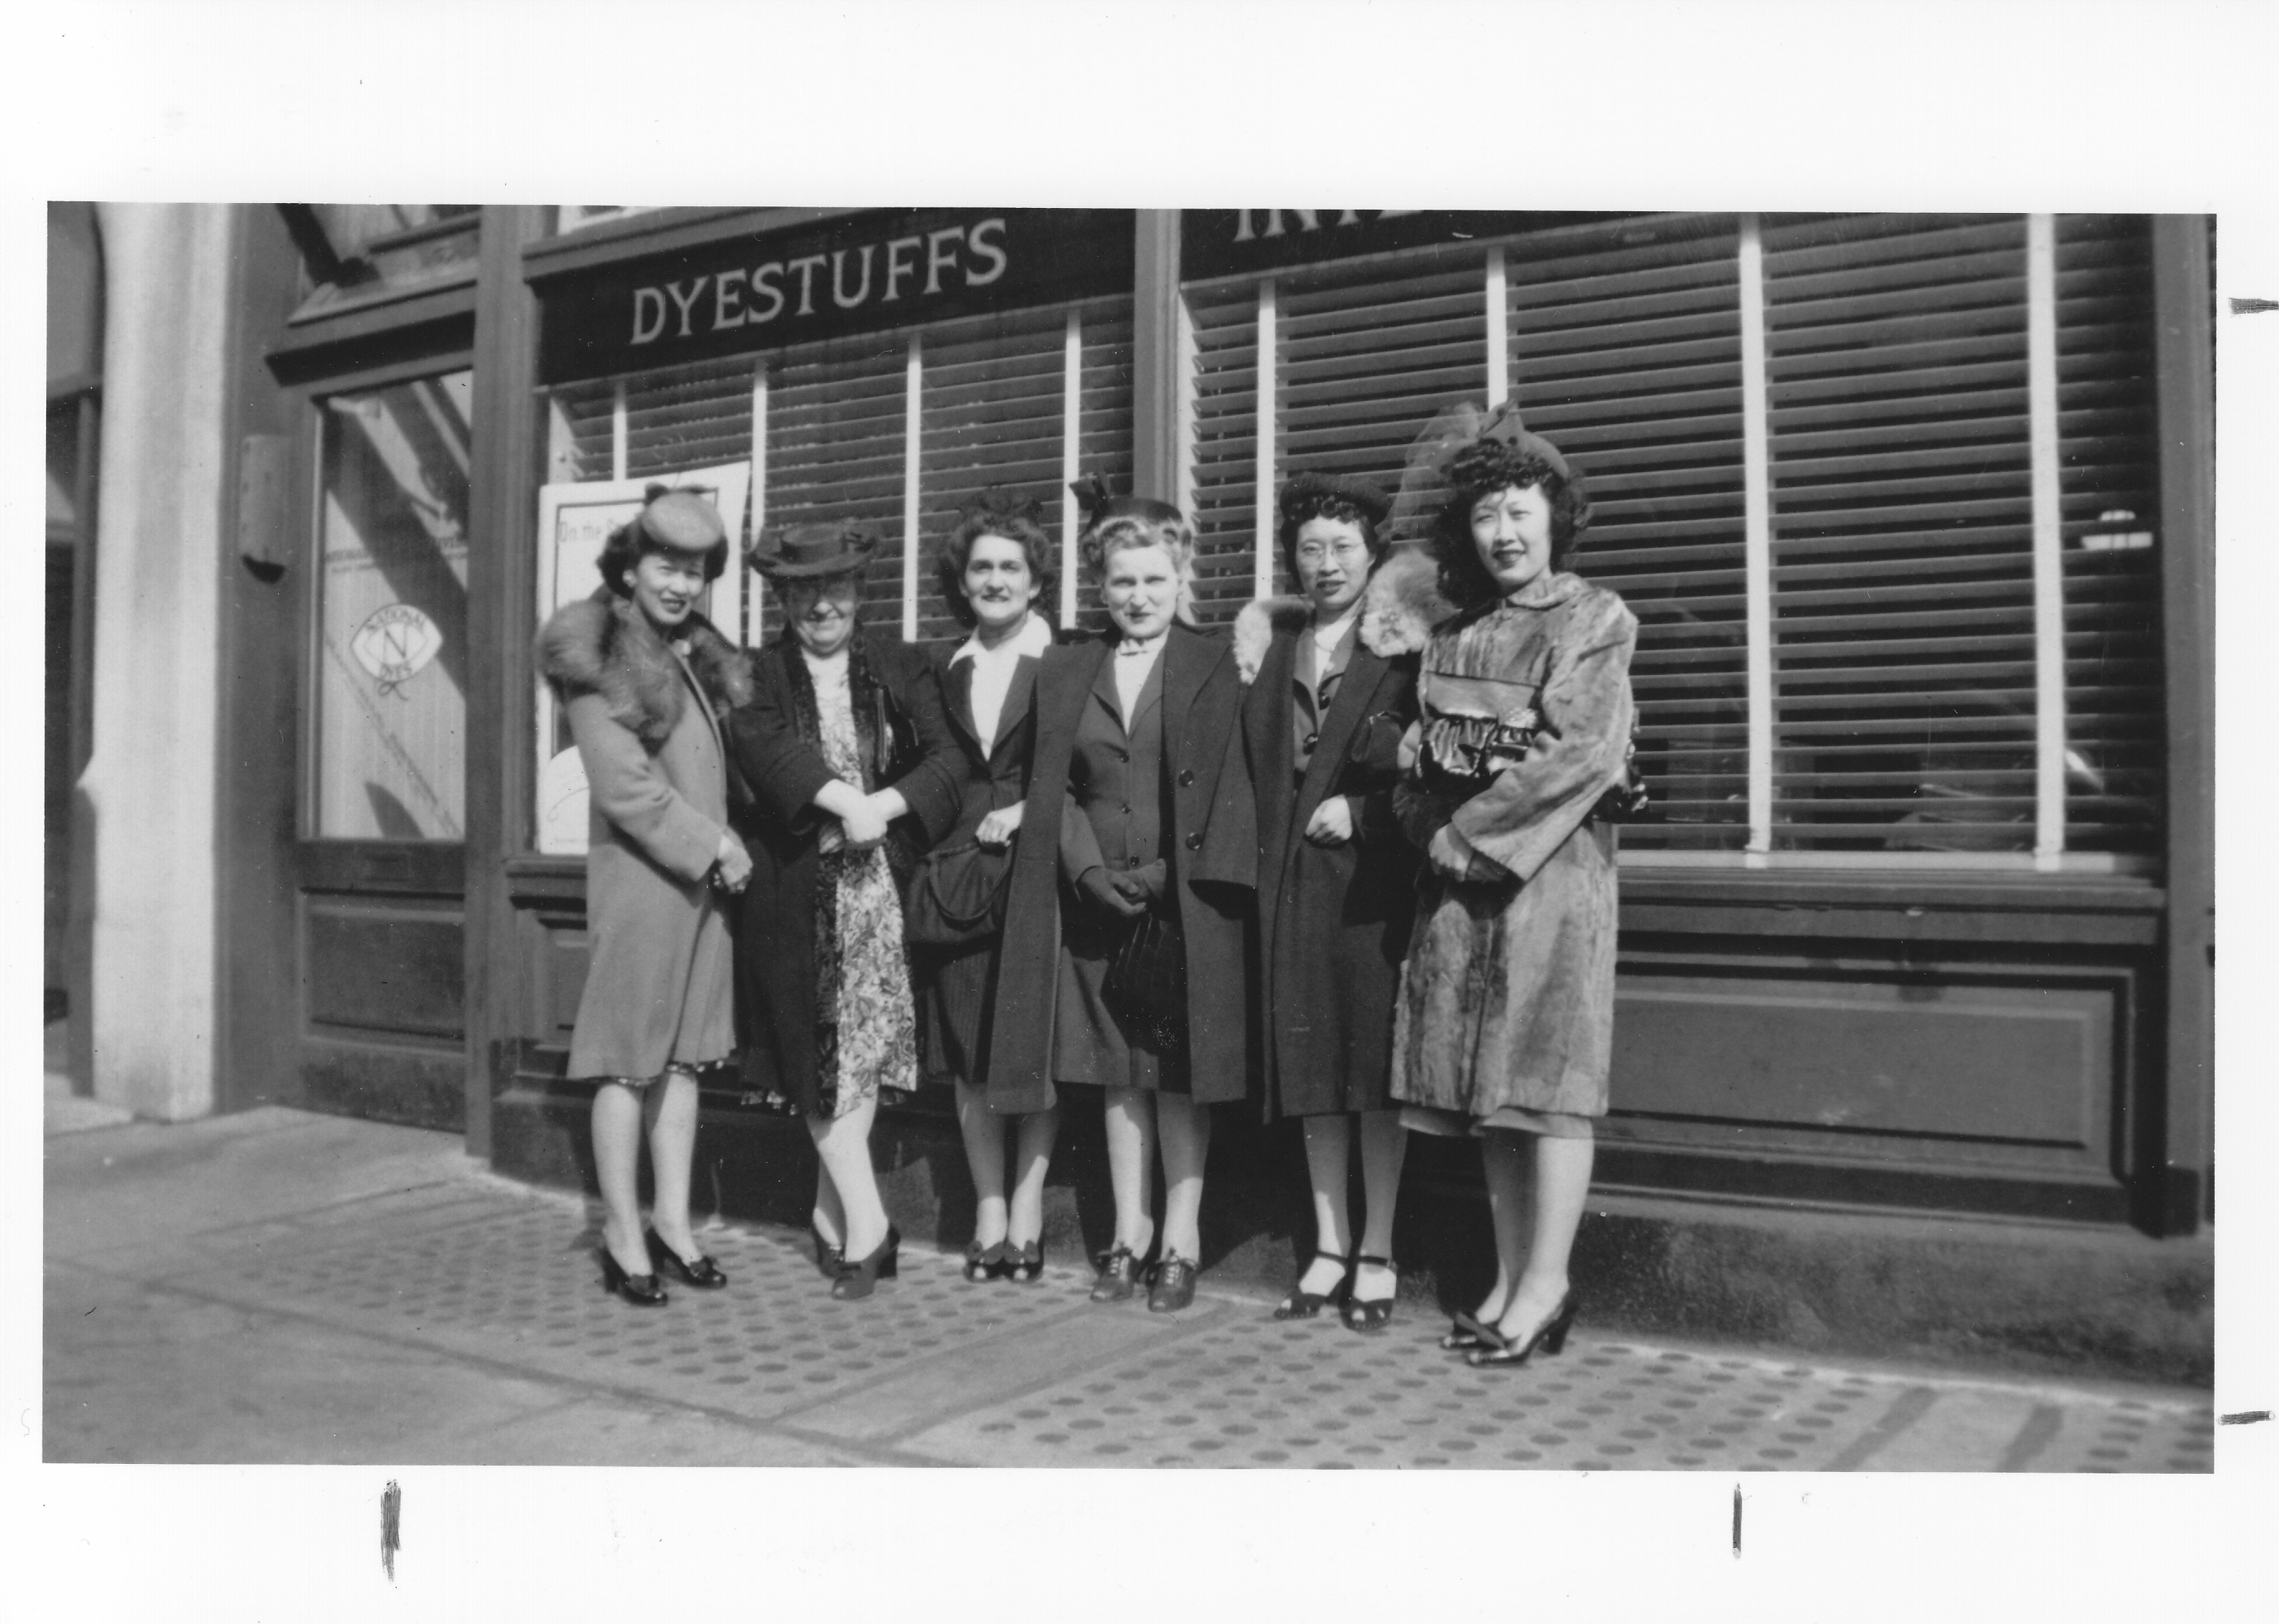 Several women wearing hats, coats, and heels stand outside a storefront.